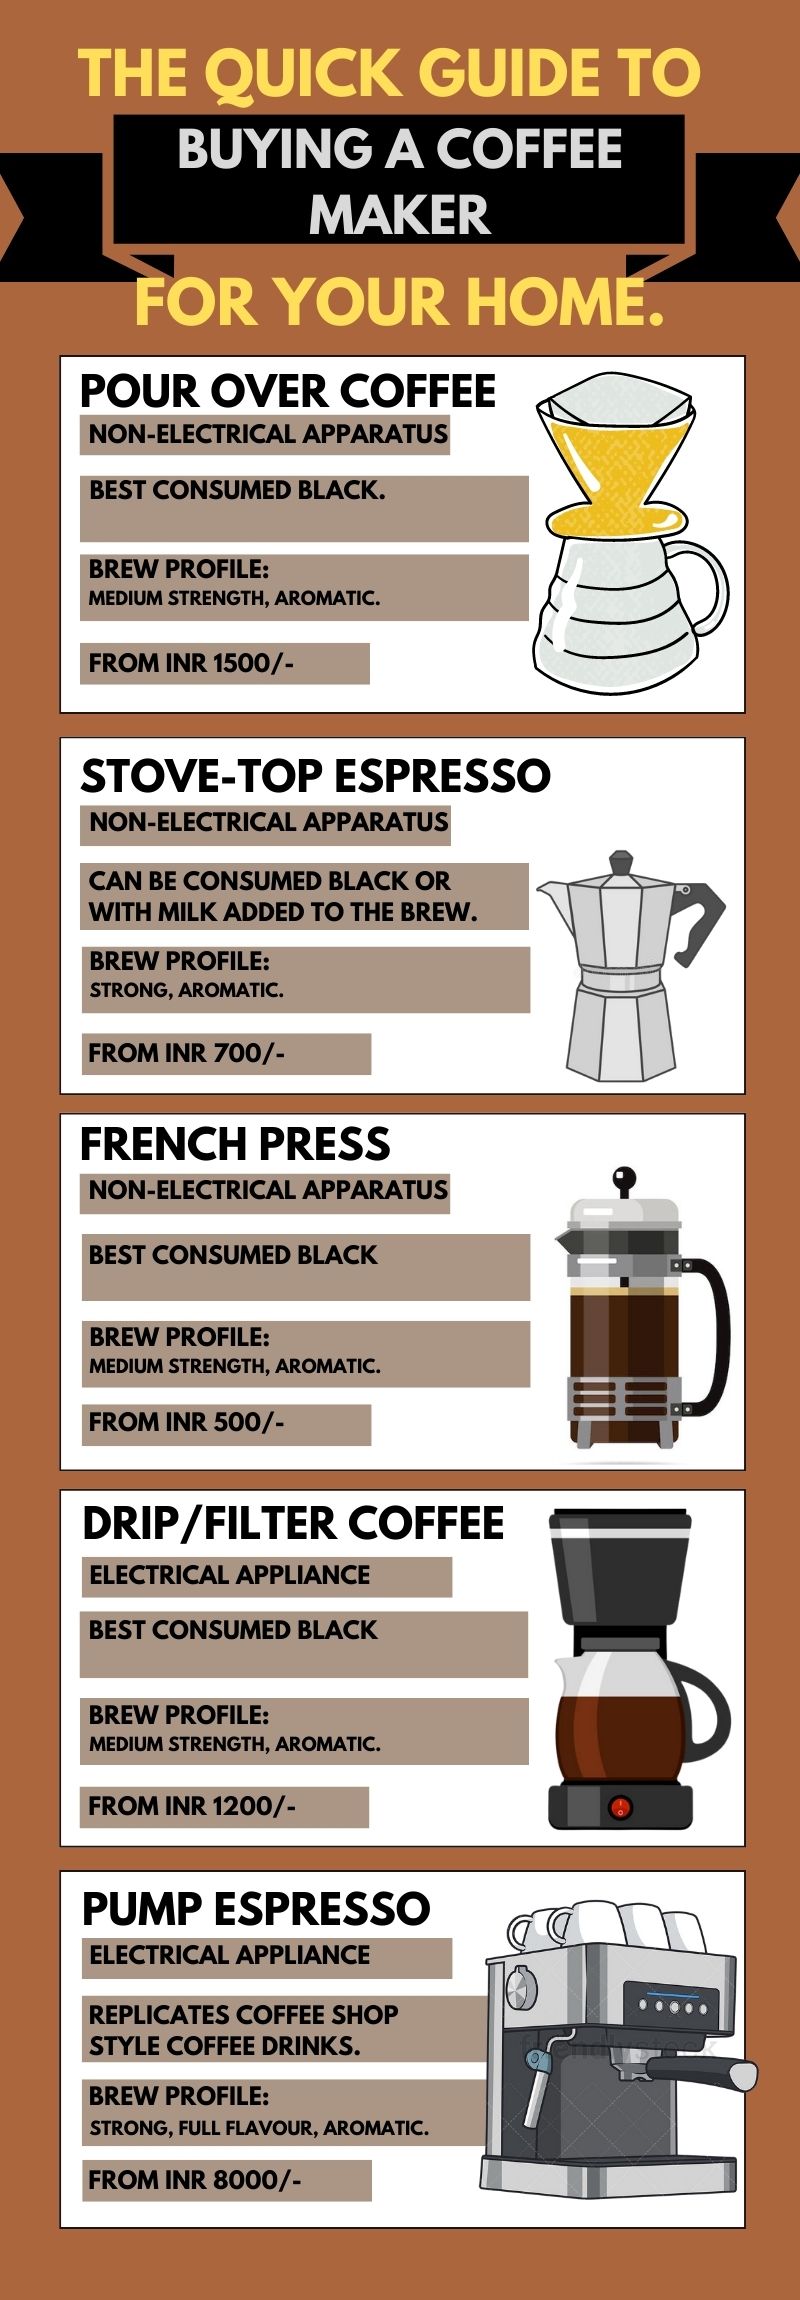 https://www.tecnora.in/blog/wp-content/uploads/2016/04/Coffee-Maker-For-Home-InfoGraphic.jpg